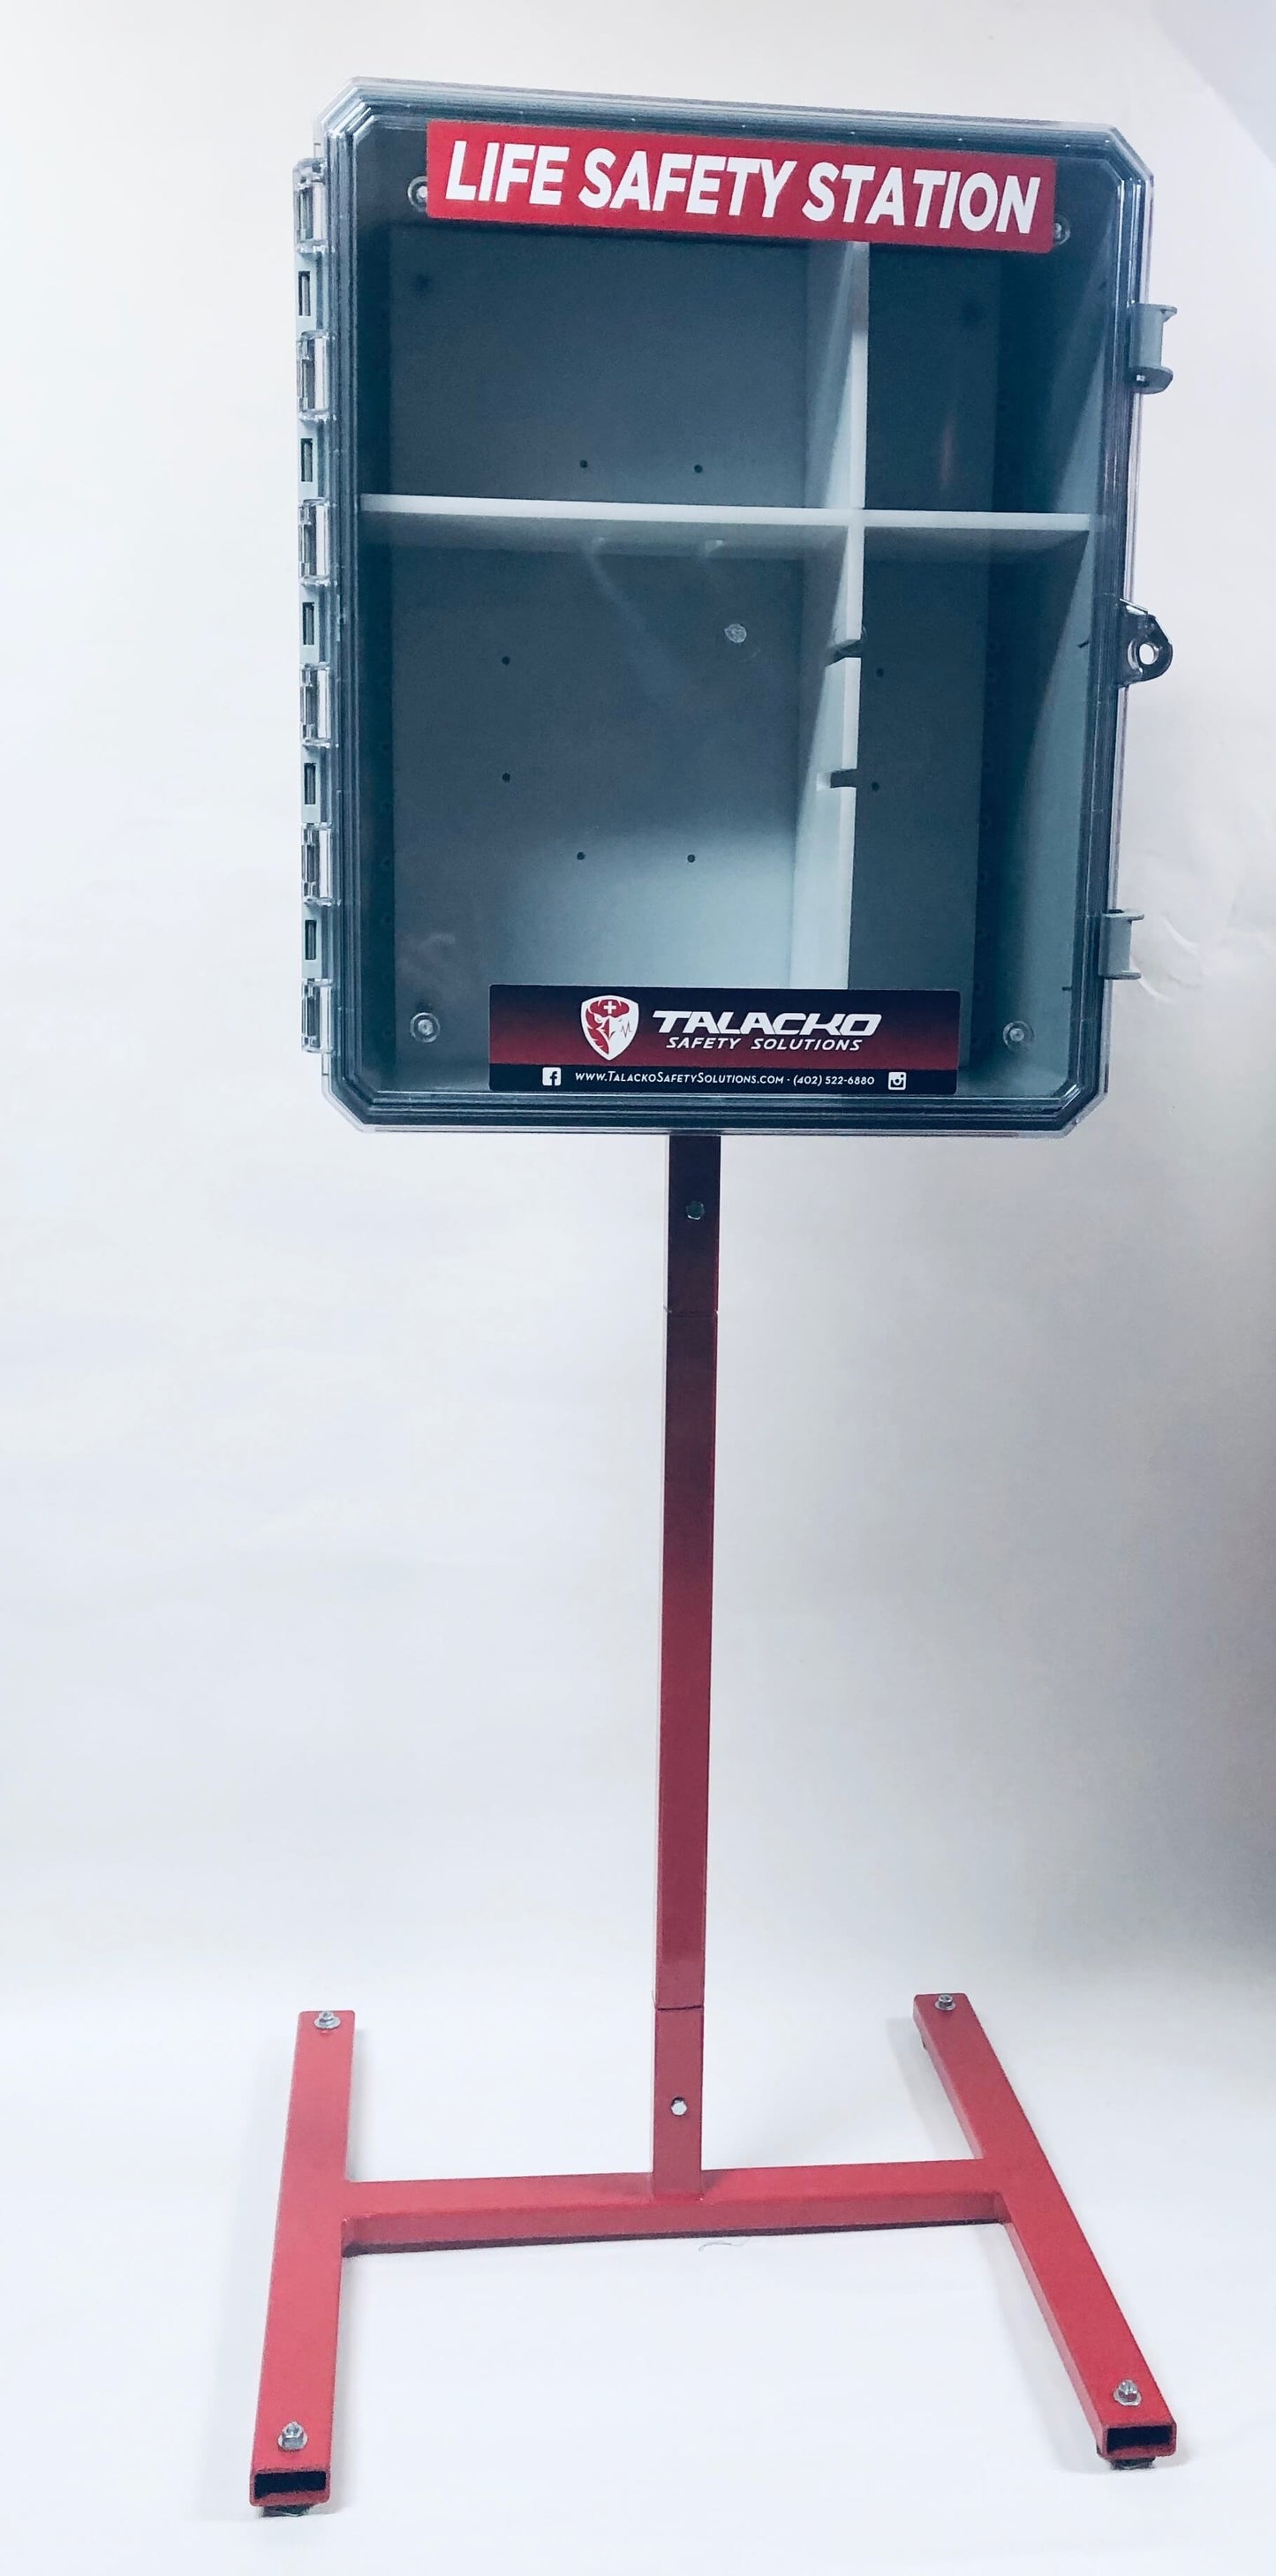 Talacko Safety Solutions Emergency Equipment Platform allows our Life Safety Station and our King Bleeding Control Station to be placed ANYWHERE indoors or out